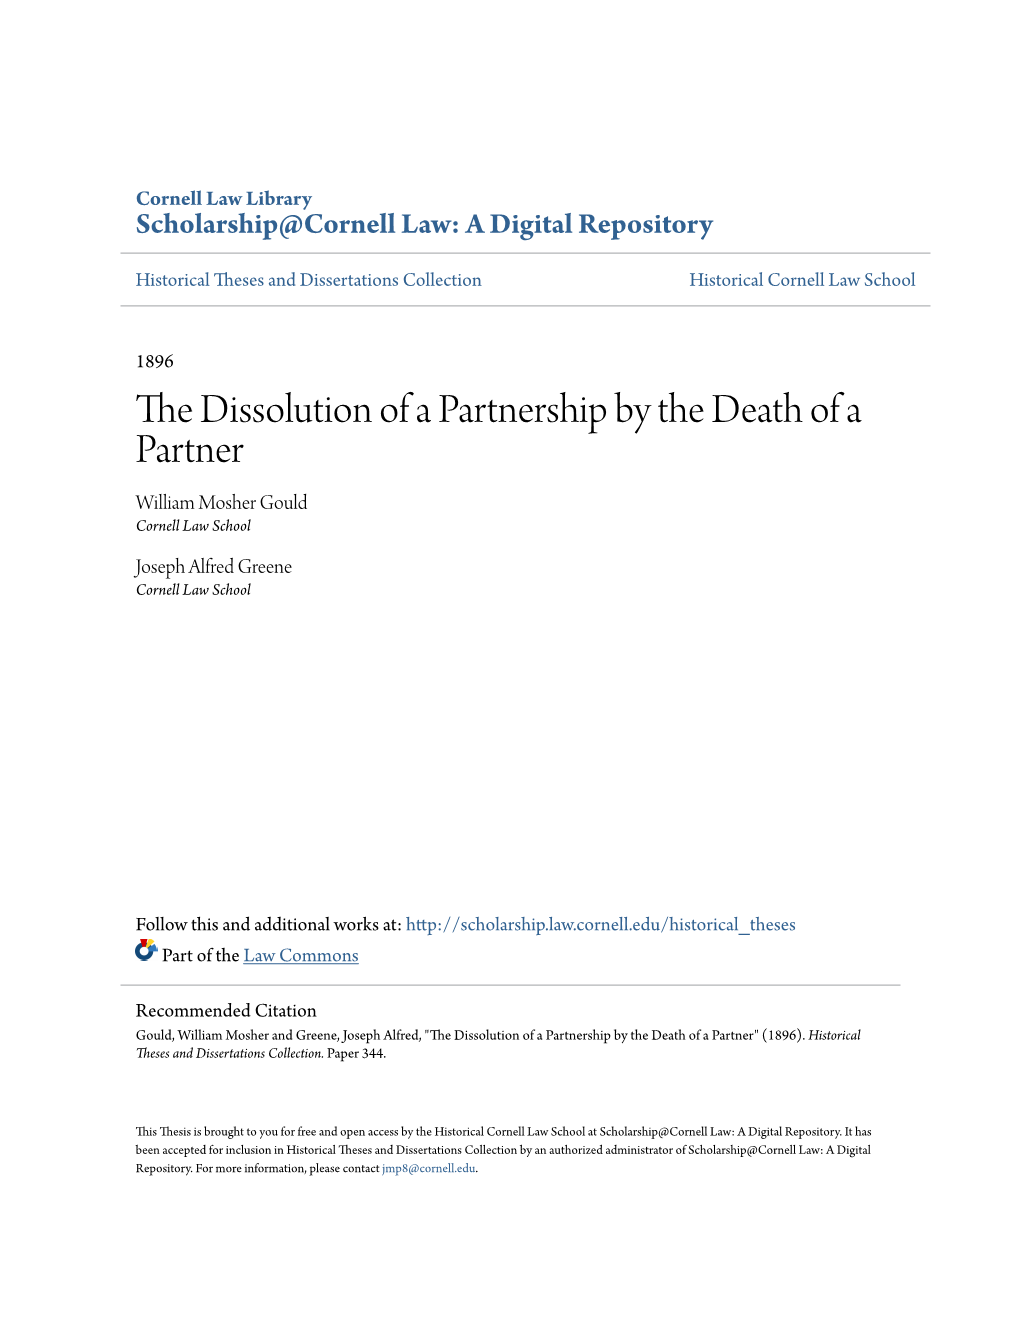 The Dissolution of a Partnership by the Death of a Partner William Mosher Gould Cornell Law School